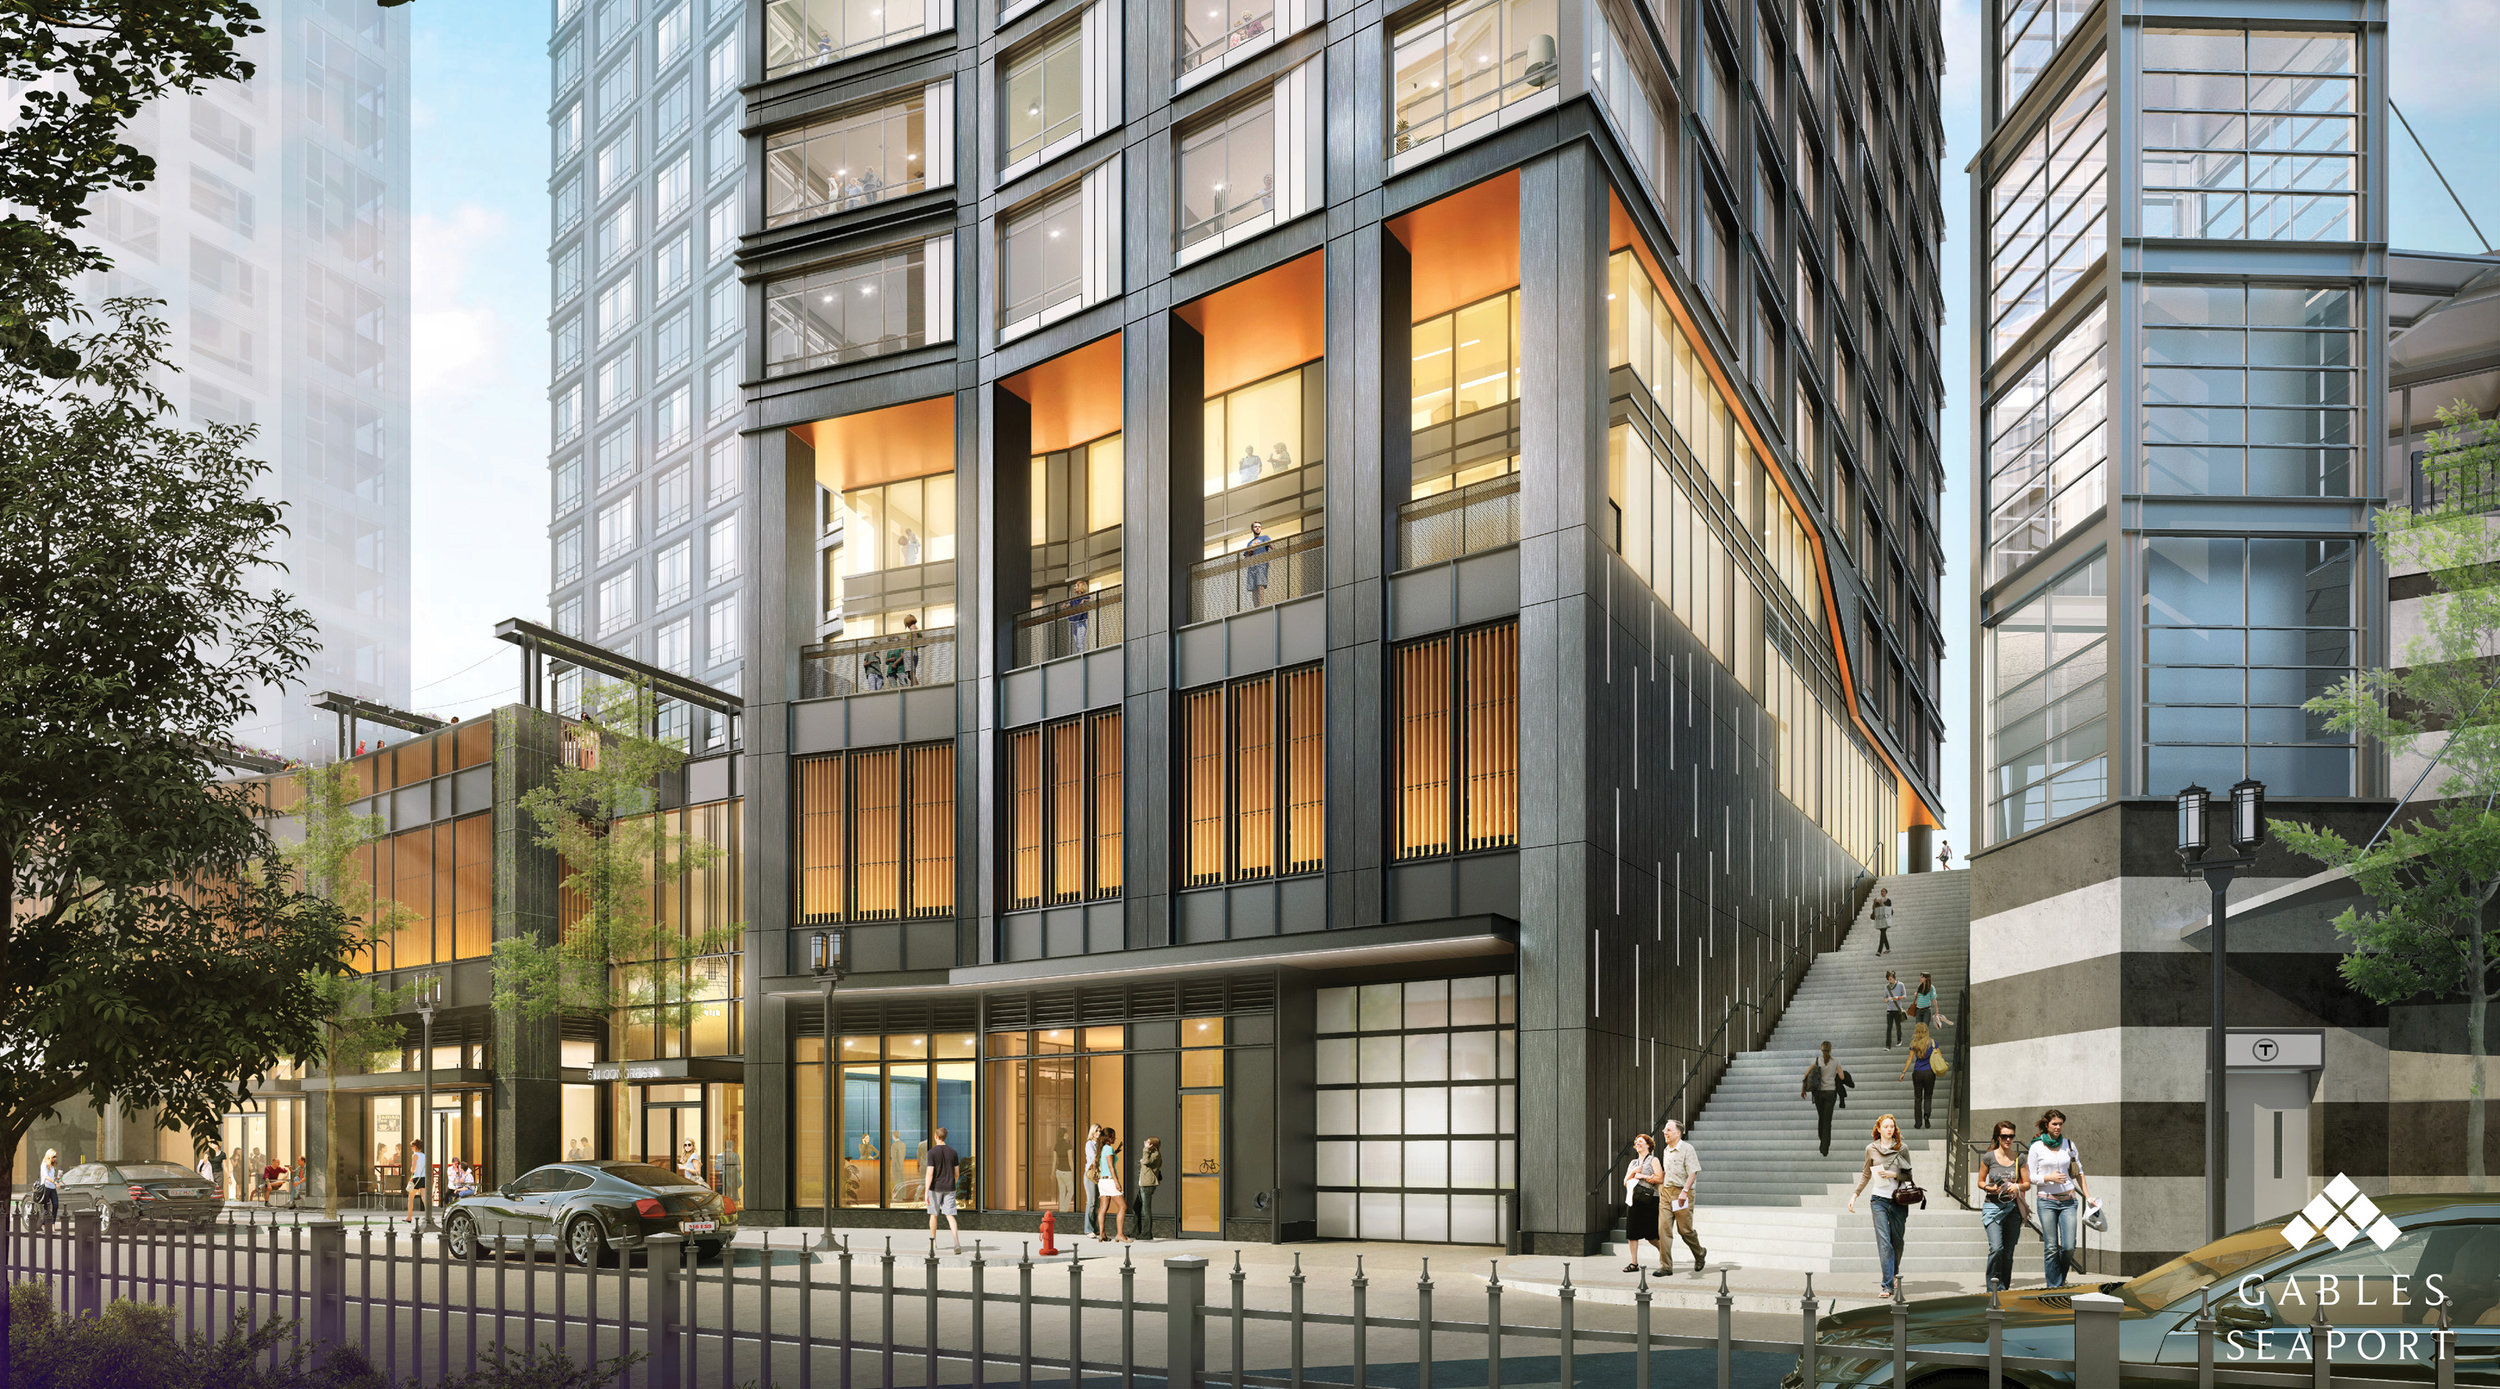  Gable Seaport (Rendering by CBT Architects) 